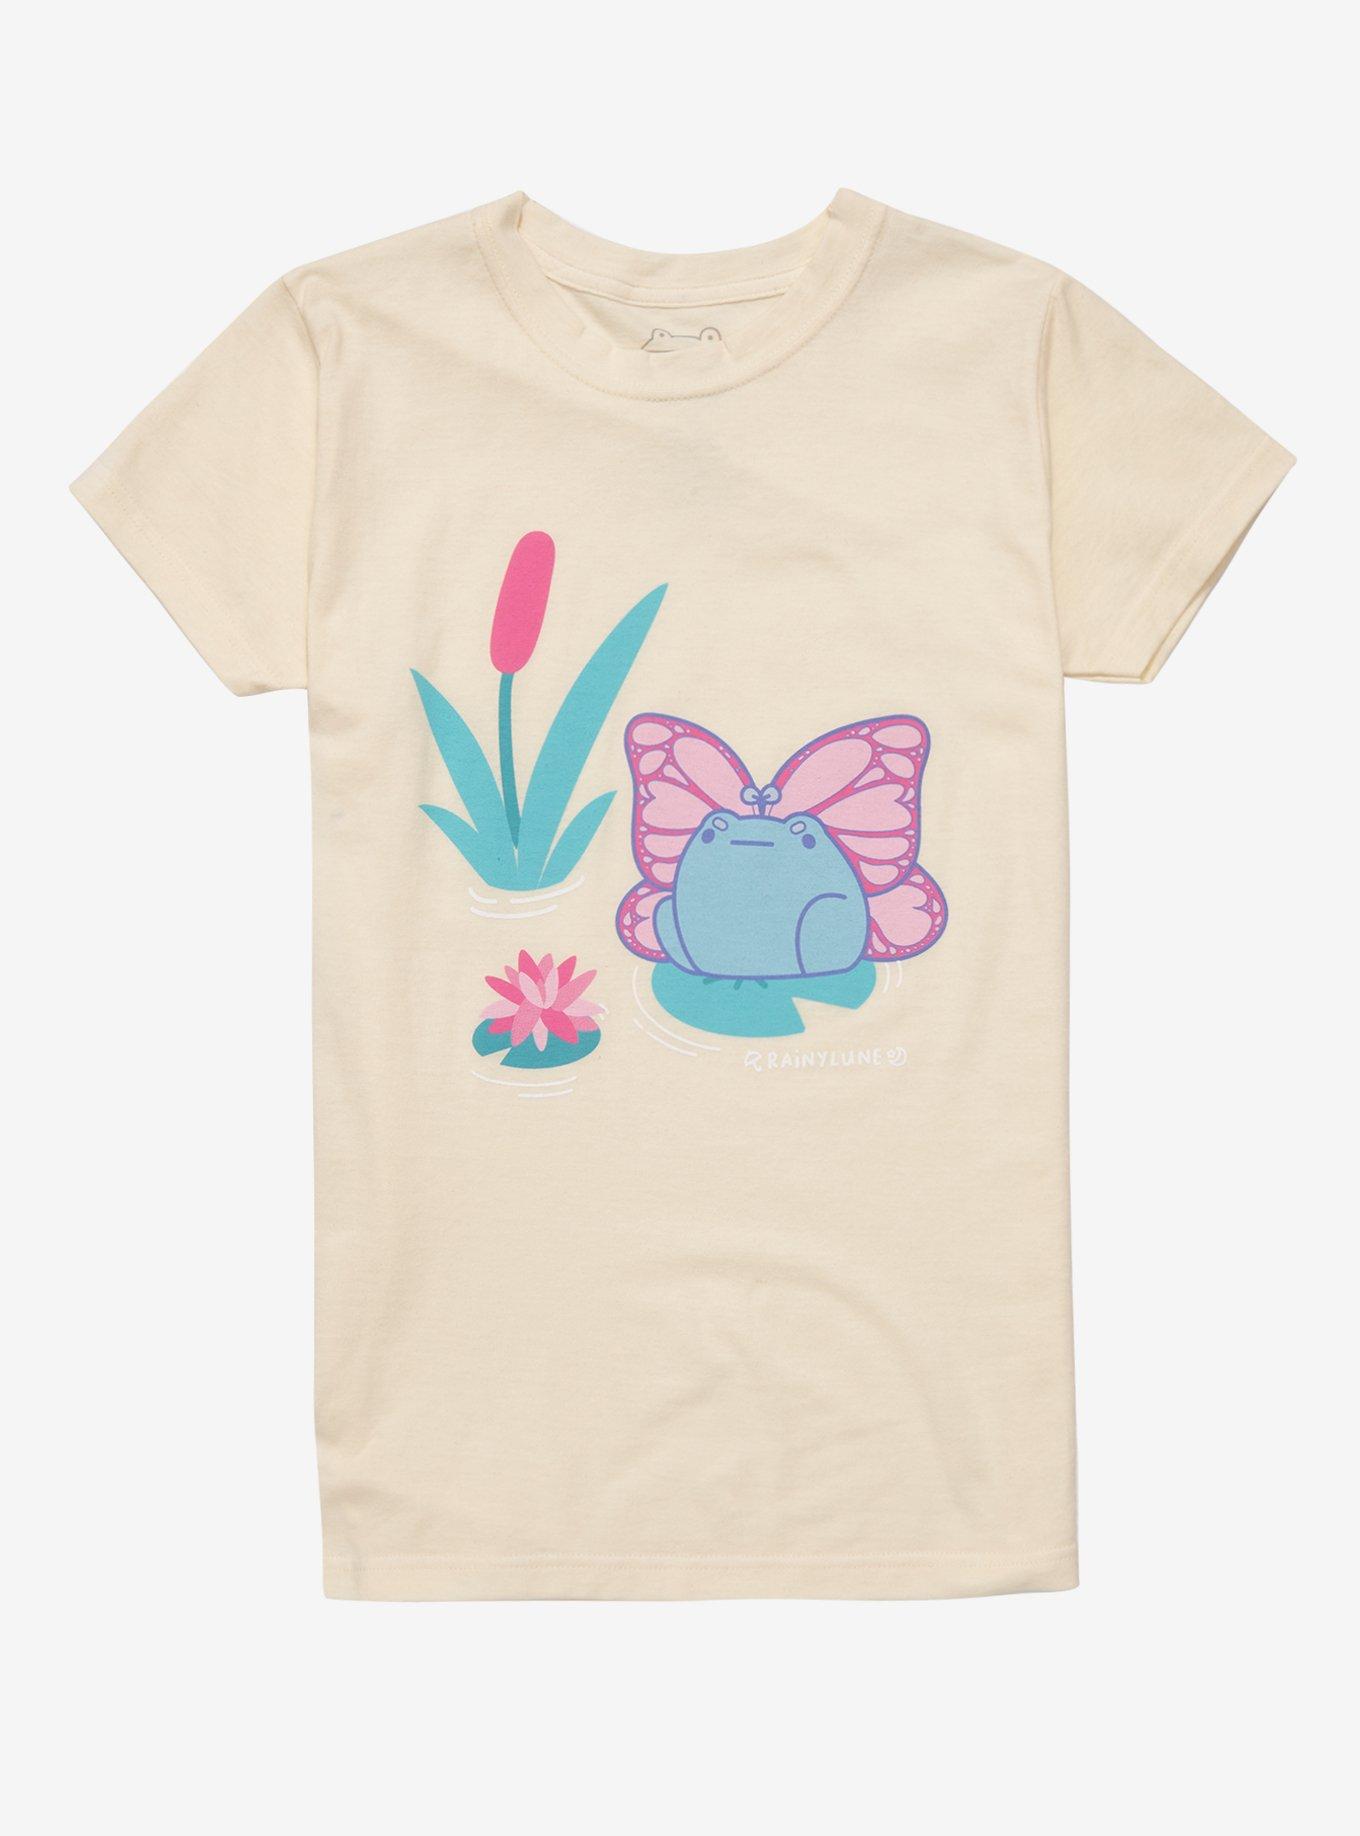 Sprout The Frog Fairy Girls T-Shirt By Rainylune, MULTI, hi-res